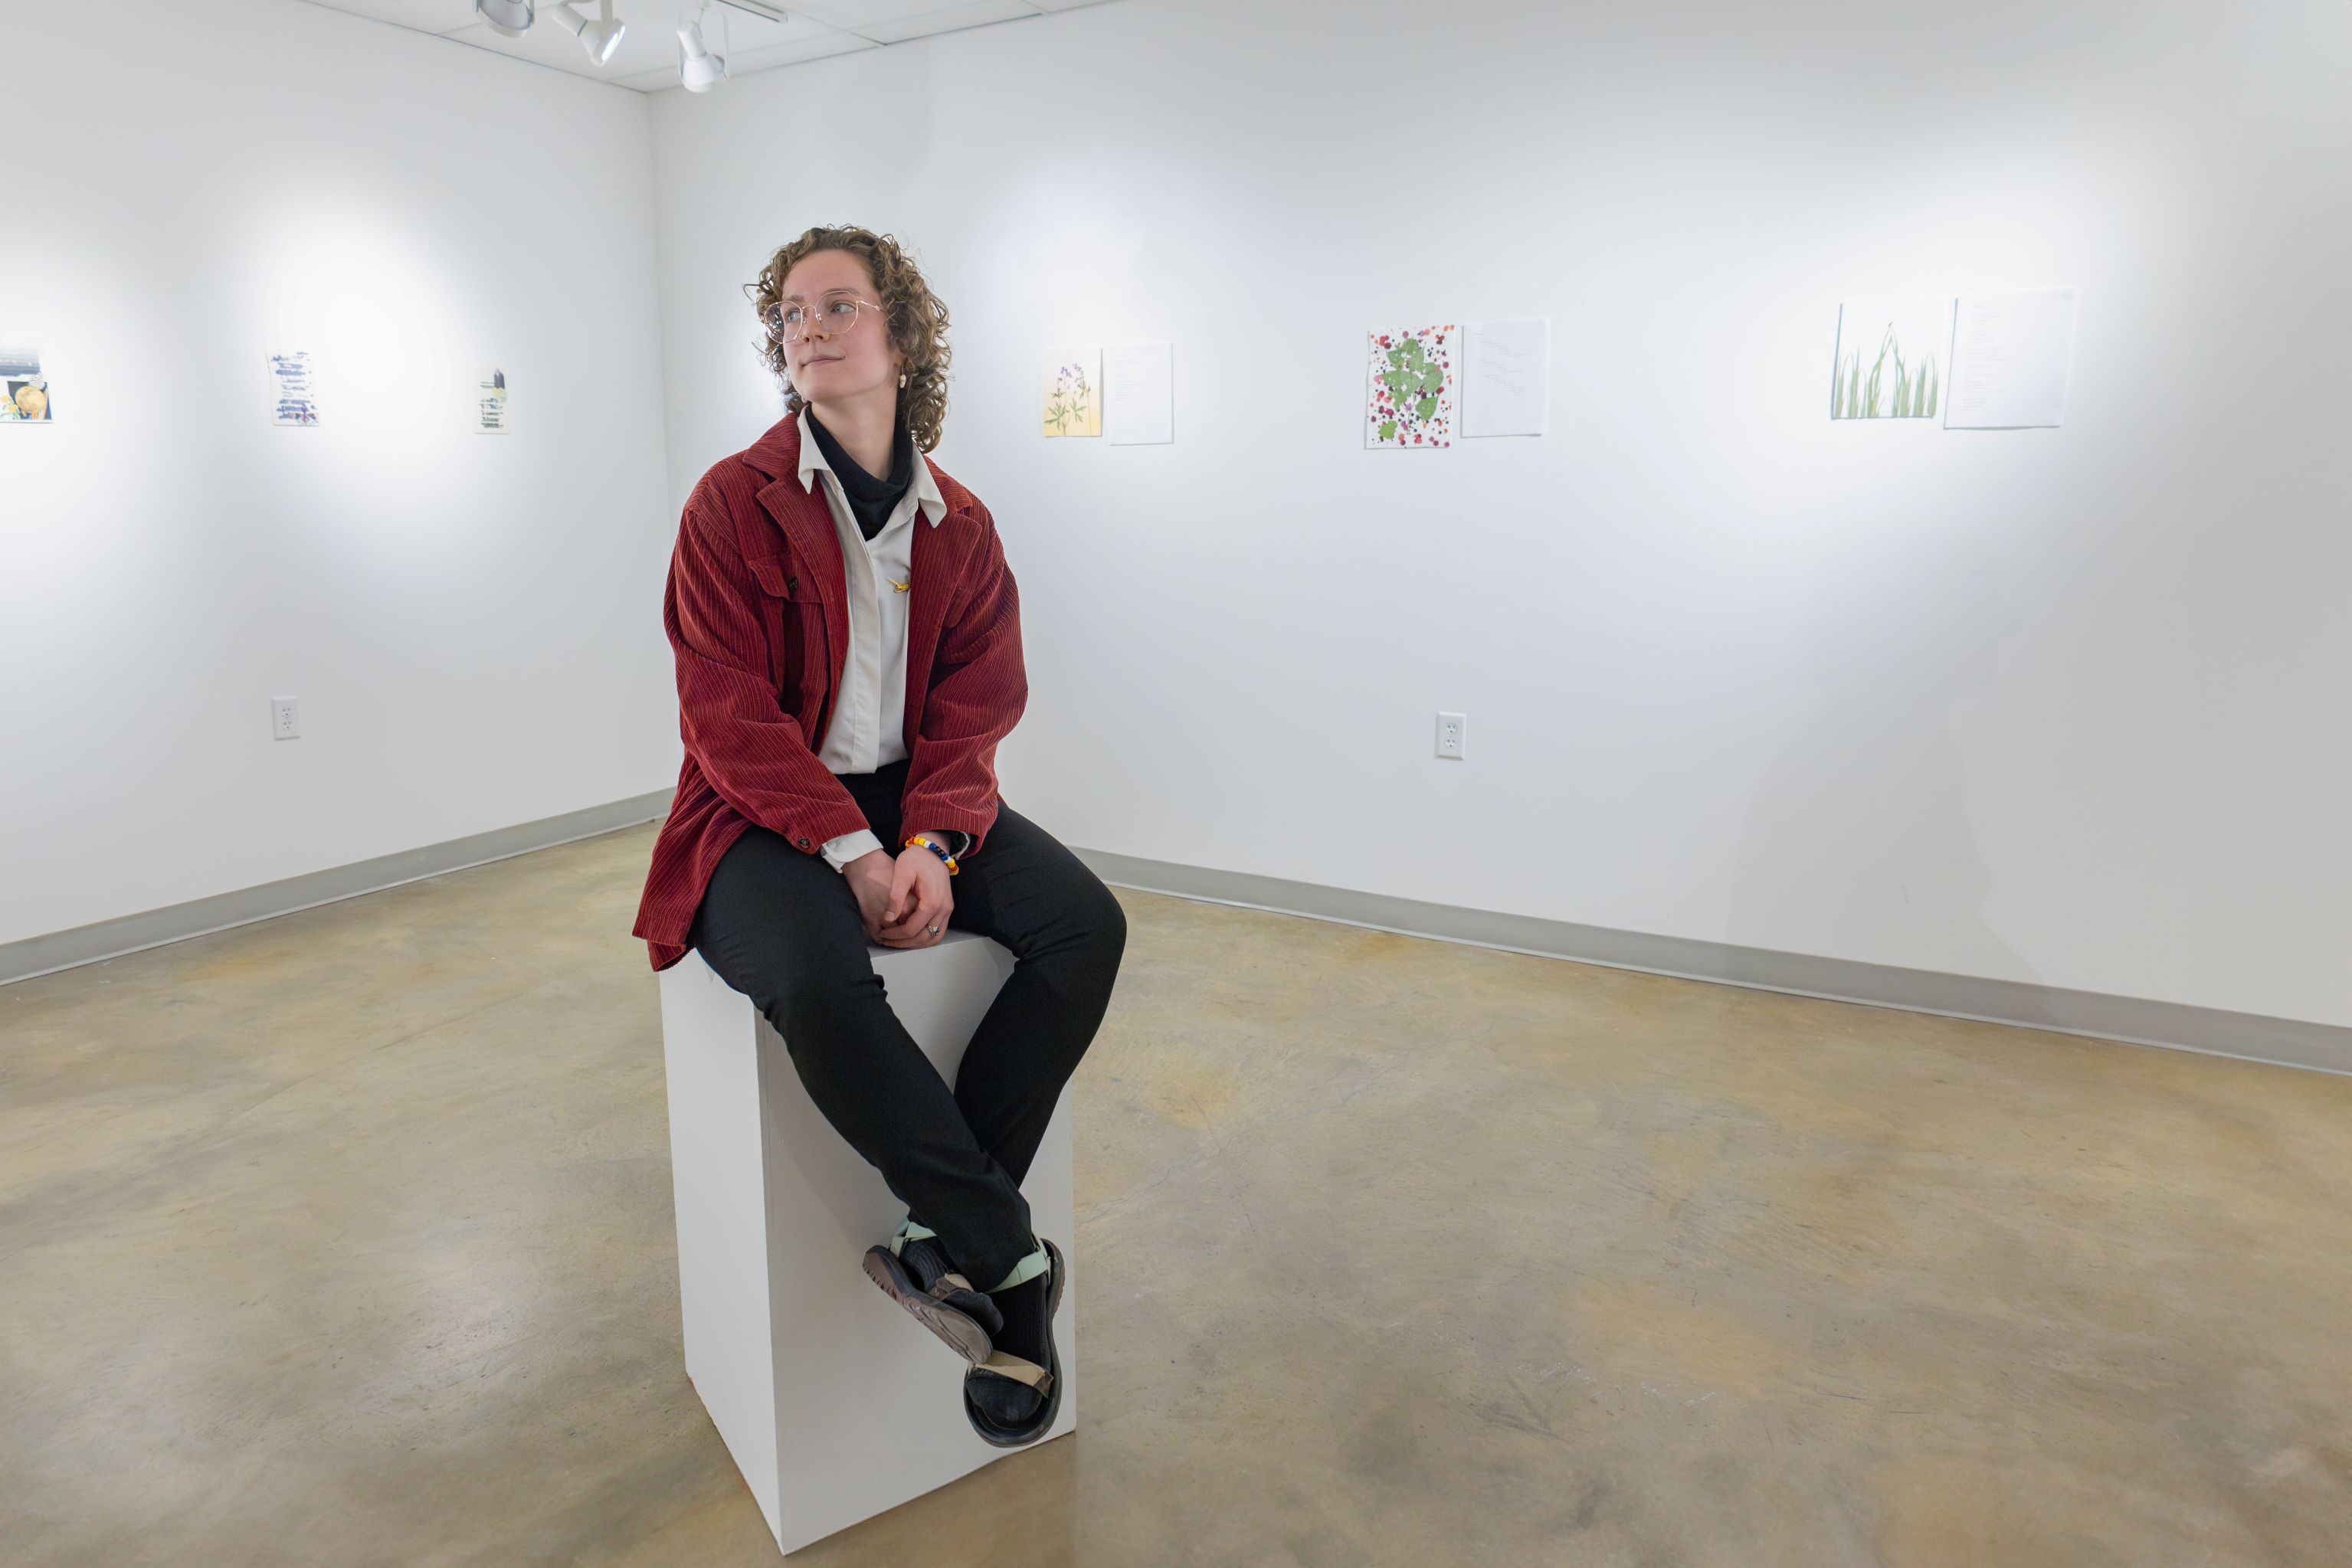 Basil Payne sitting on art stand in gallery with poetry exhibition pieces on the wall walls around them